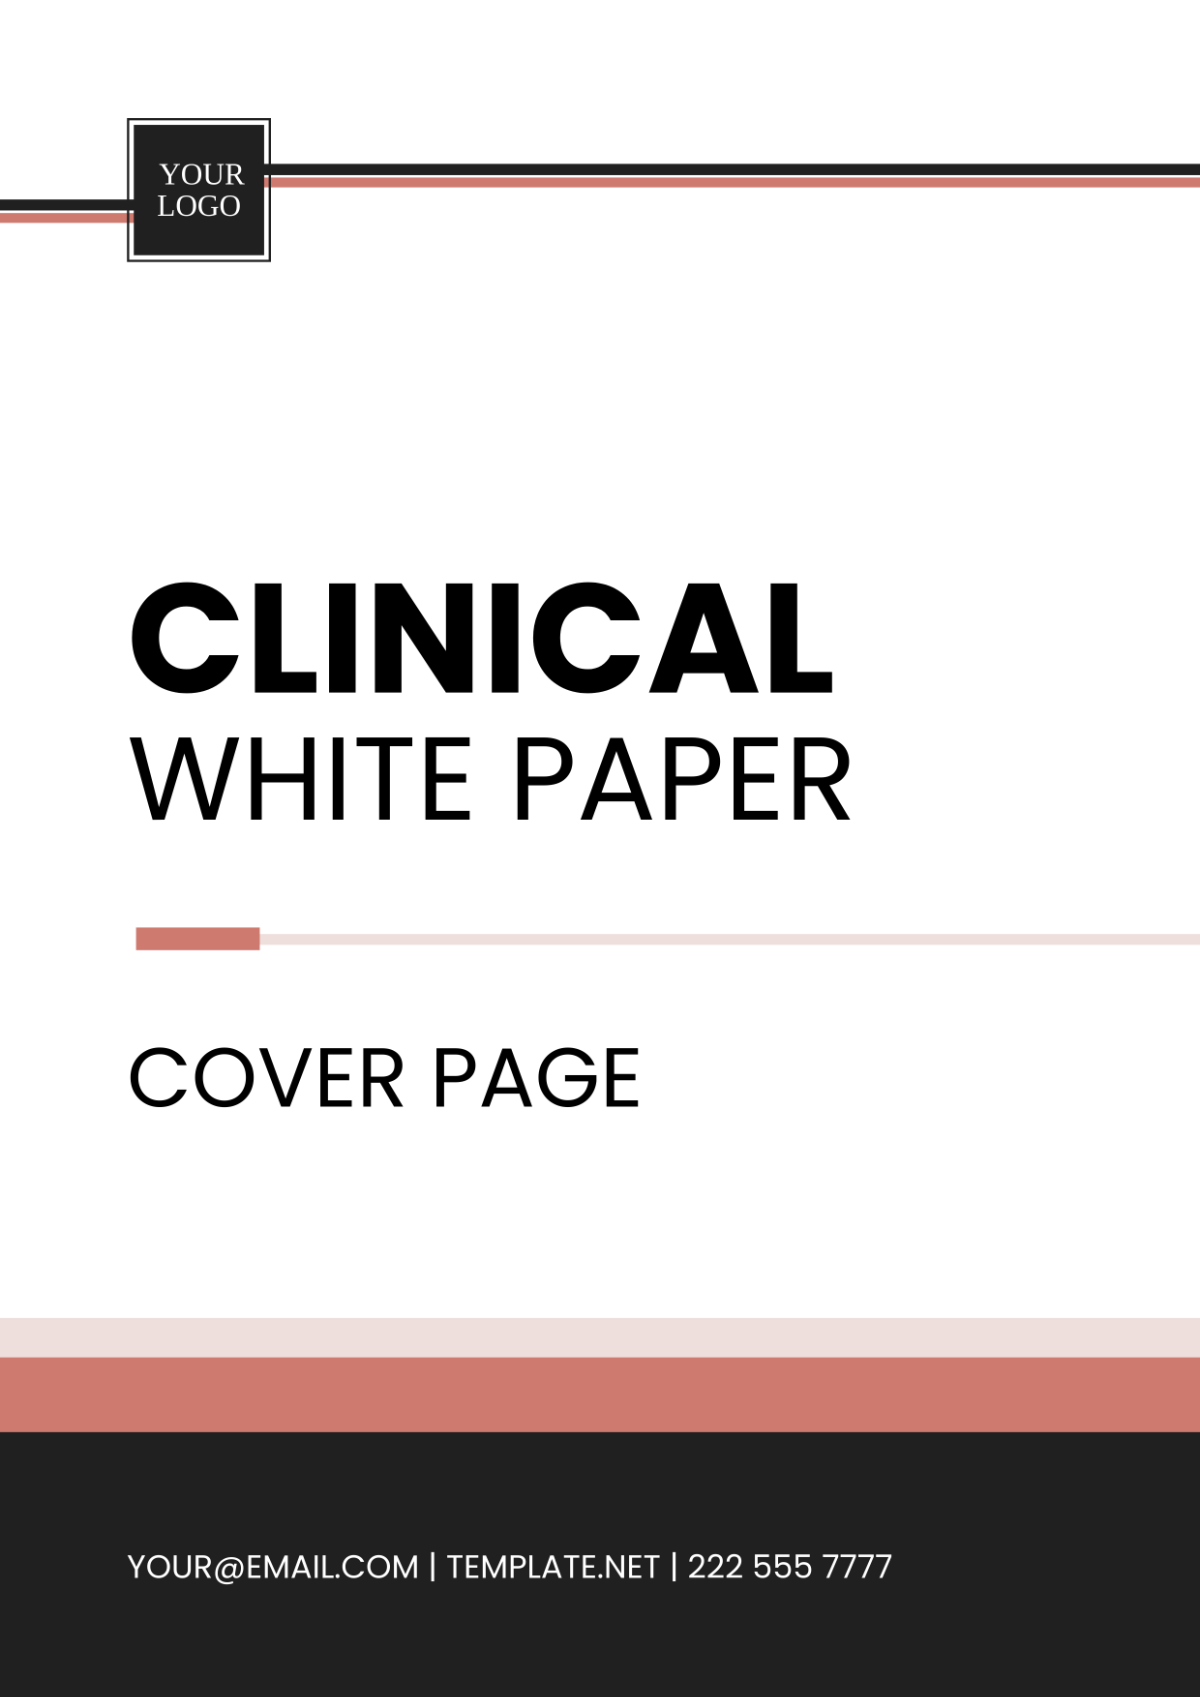 Clinical White Paper Cover Page Template